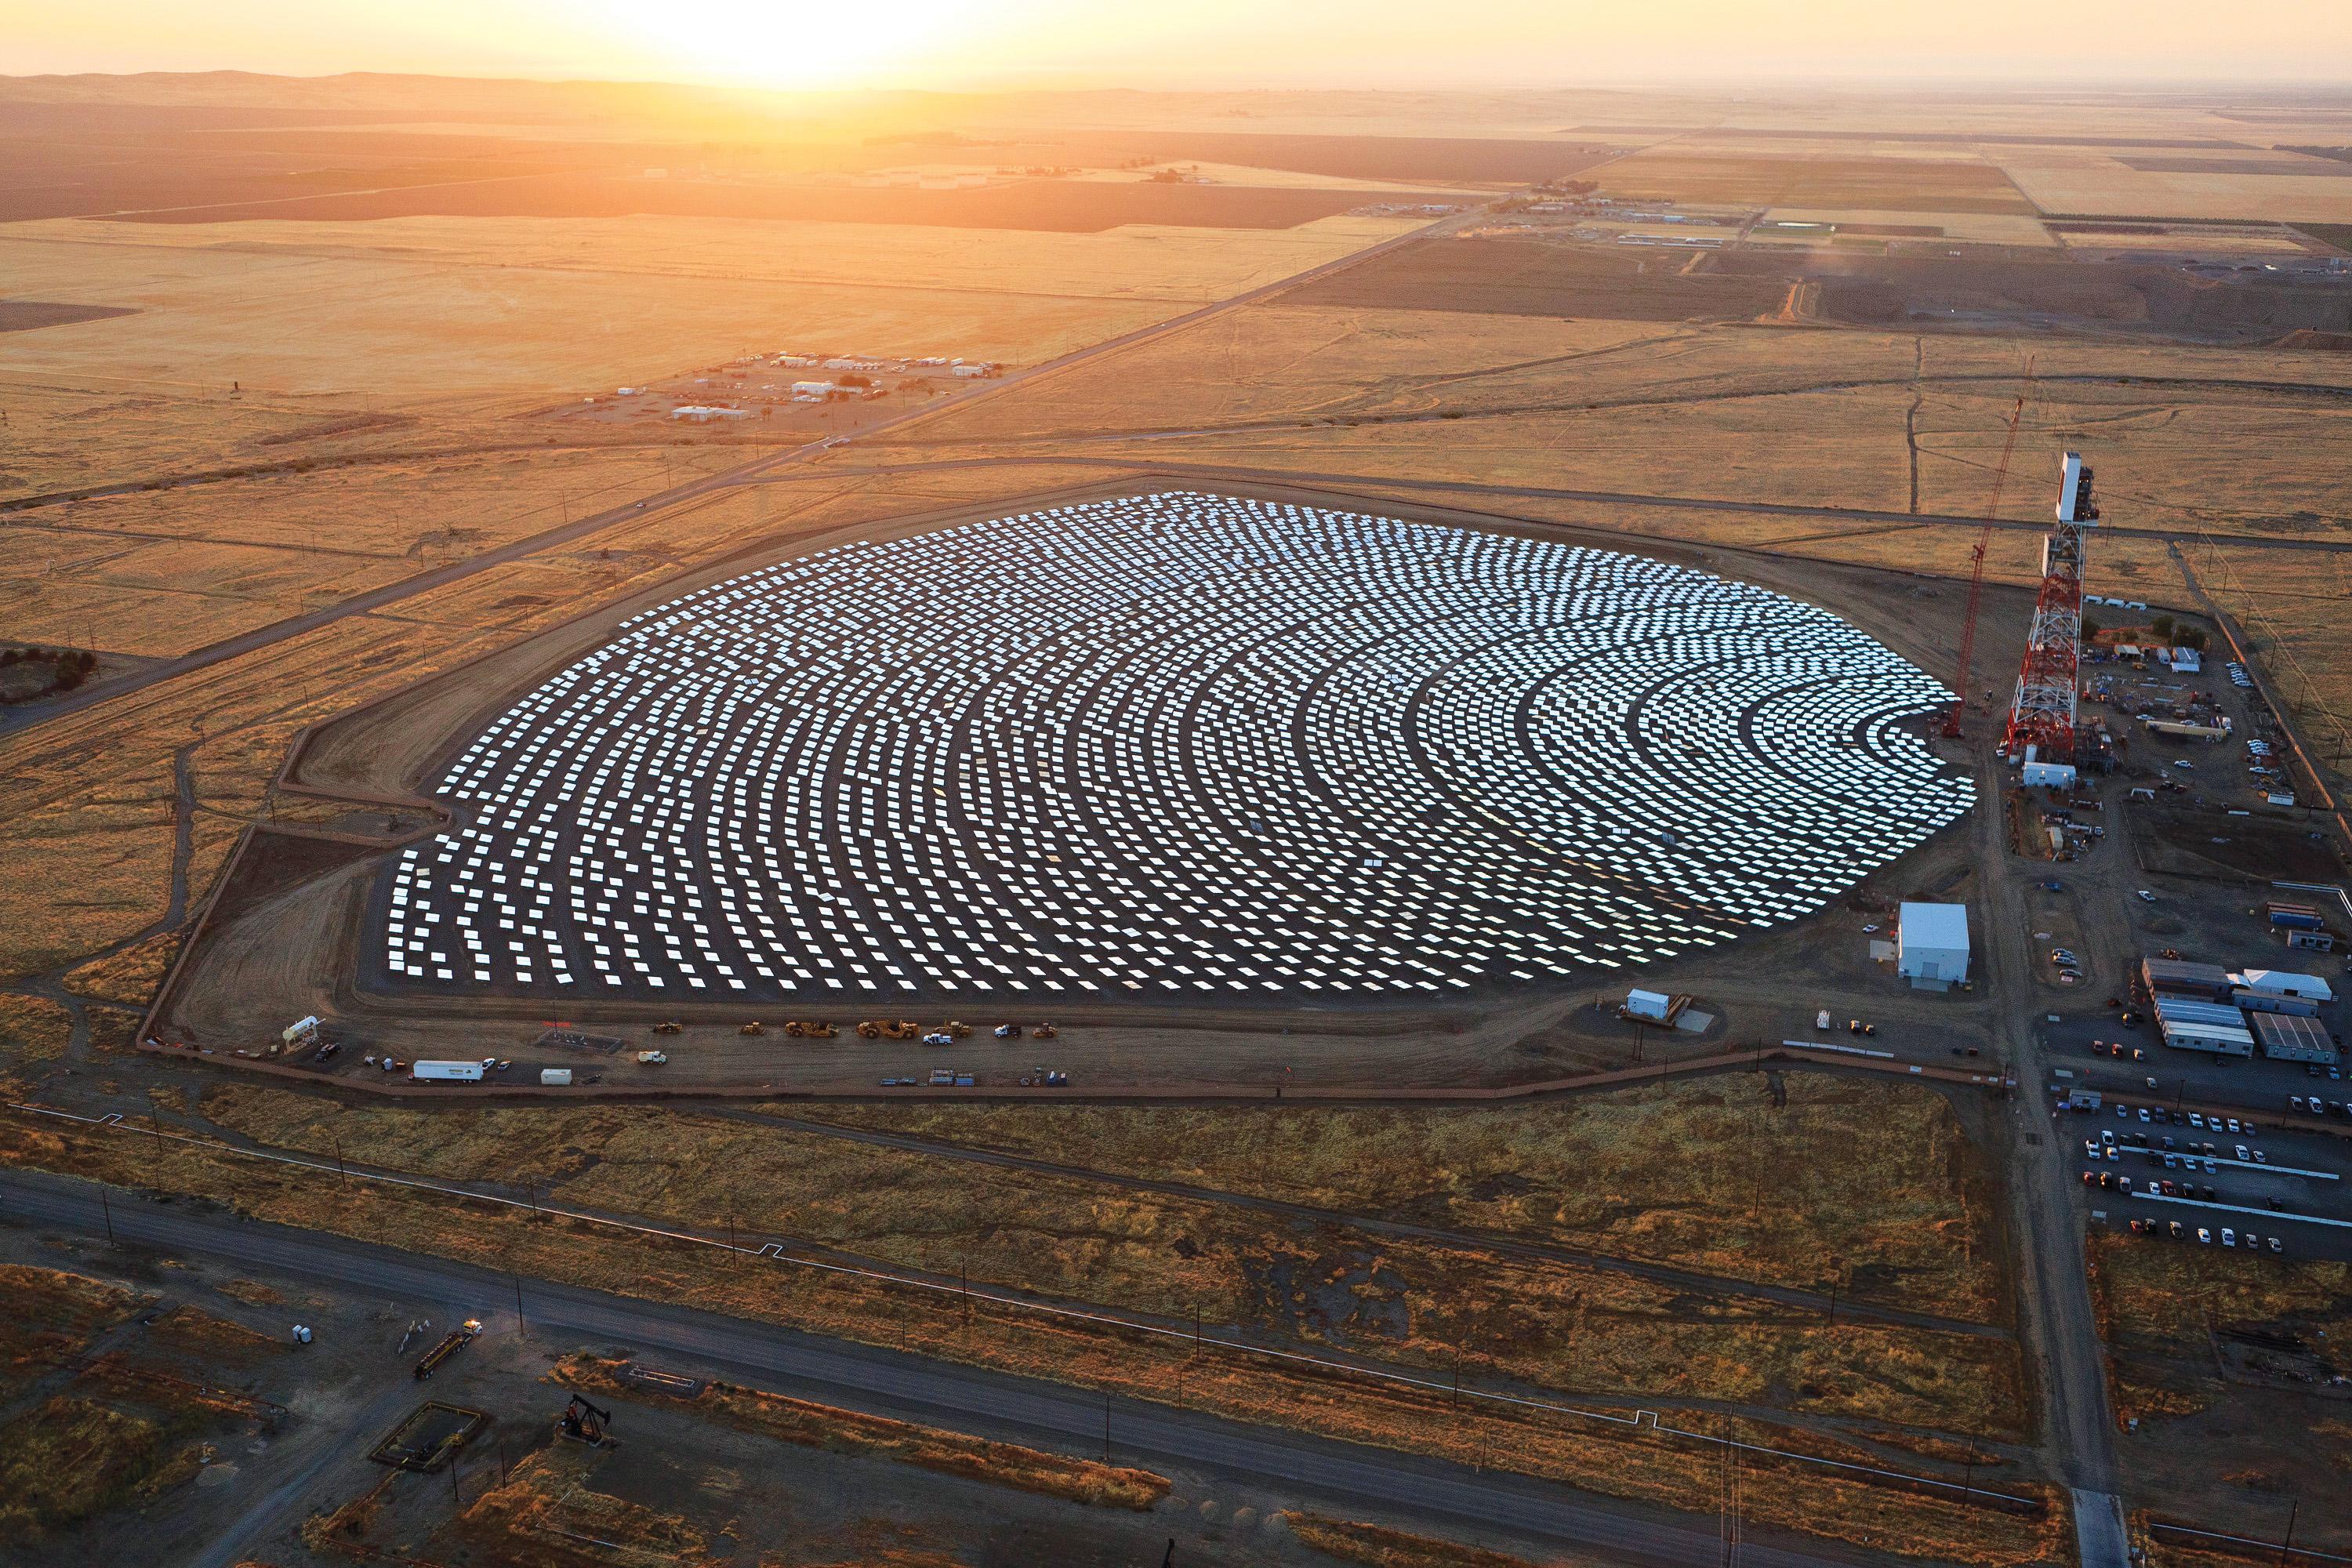 abengoa-brightsource-to-build-world-s-largest-solar-power-towers-in